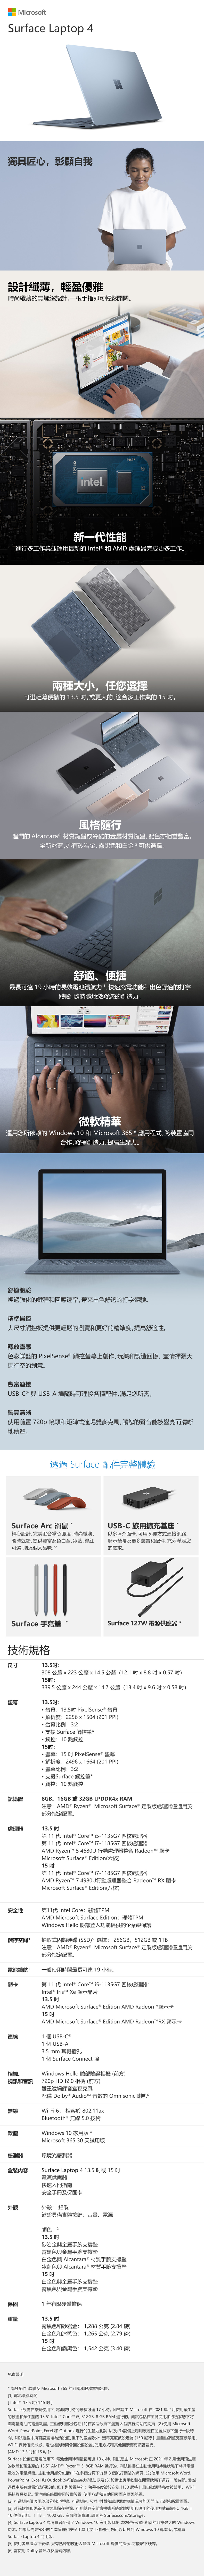 Surface Laptop 4 PDP_Ice Blue_1040